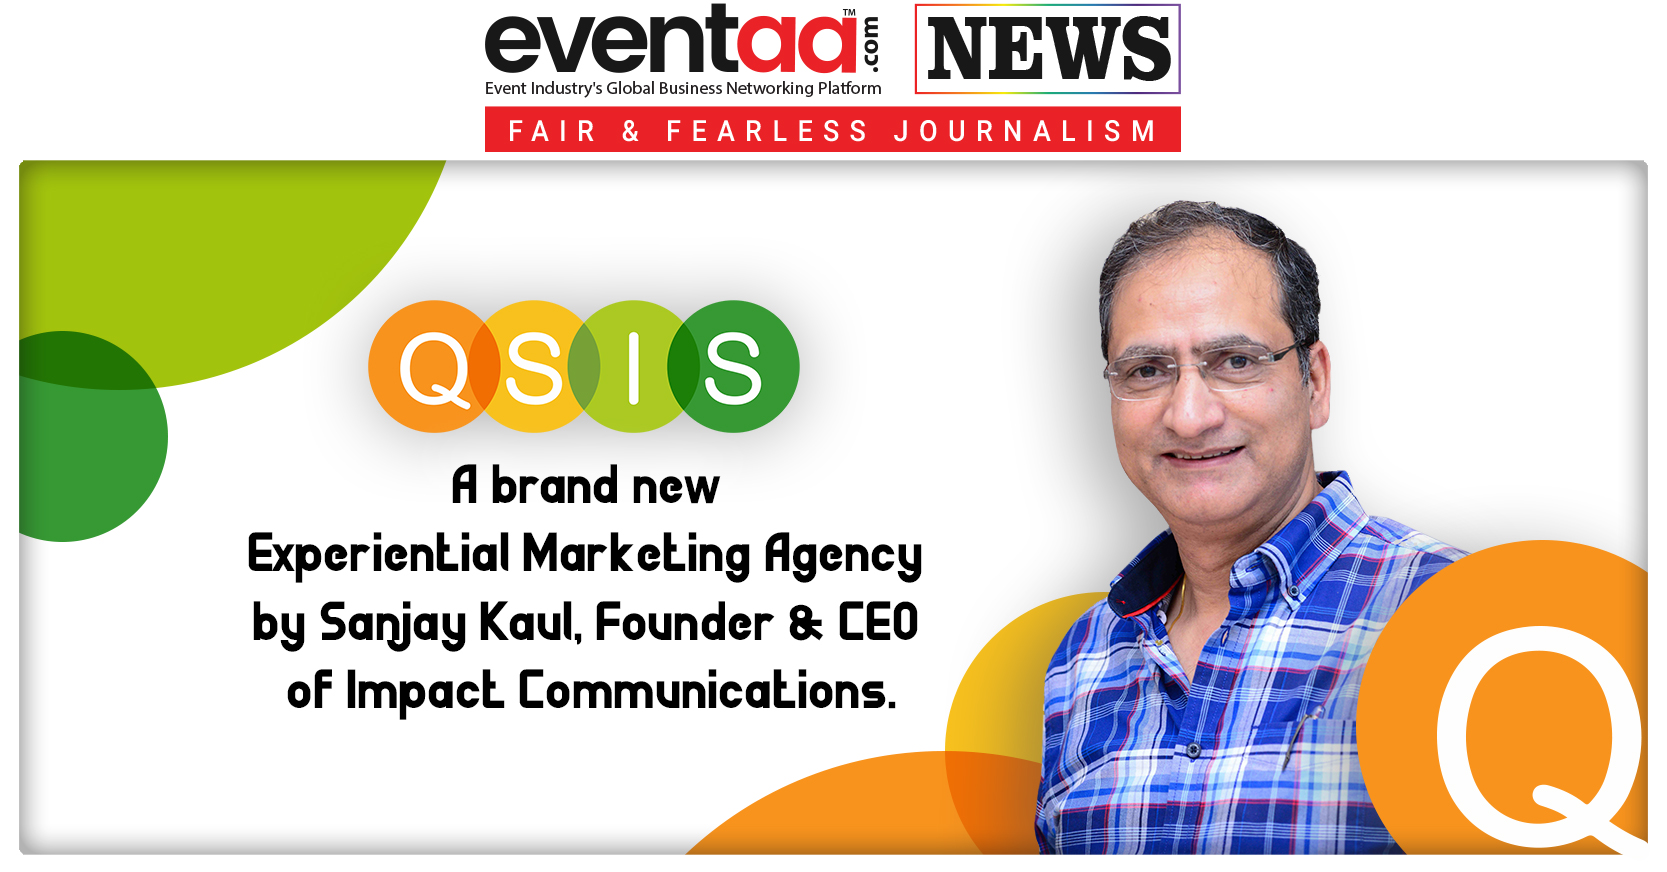 QSIS - A brand new experiential marketing agency by Sanjay Kaul, Founder & CEO of Impact Communications